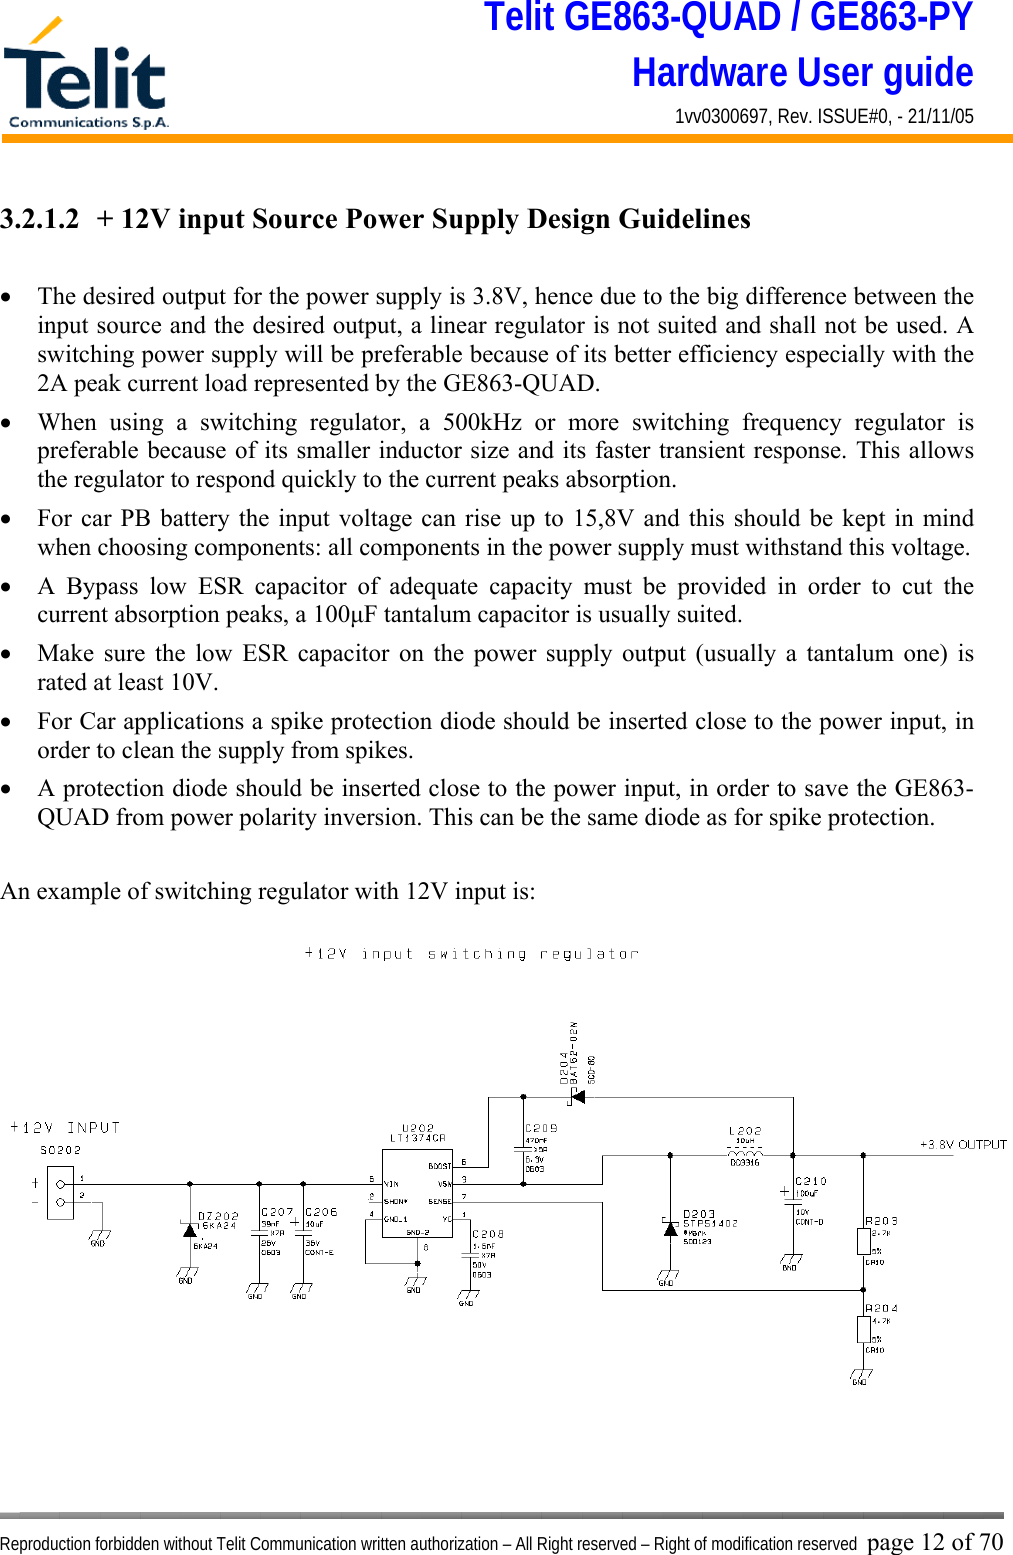 Telit GE863-QUAD / GE863-PY Hardware User guide 1vv0300697, Rev. ISSUE#0, - 21/11/05    Reproduction forbidden without Telit Communication written authorization – All Right reserved – Right of modification reserved page 12 of 70 3.2.1.2  + 12V input Source Power Supply Design Guidelines  •  The desired output for the power supply is 3.8V, hence due to the big difference between the input source and the desired output, a linear regulator is not suited and shall not be used. A switching power supply will be preferable because of its better efficiency especially with the 2A peak current load represented by the GE863-QUAD. •  When using a switching regulator, a 500kHz or more switching frequency regulator is preferable because of its smaller inductor size and its faster transient response. This allows the regulator to respond quickly to the current peaks absorption.  •  For car PB battery the input voltage can rise up to 15,8V and this should be kept in mind when choosing components: all components in the power supply must withstand this voltage. •  A Bypass low ESR capacitor of adequate capacity must be provided in order to cut the current absorption peaks, a 100μF tantalum capacitor is usually suited. •  Make sure the low ESR capacitor on the power supply output (usually a tantalum one) is rated at least 10V. •  For Car applications a spike protection diode should be inserted close to the power input, in order to clean the supply from spikes.  •  A protection diode should be inserted close to the power input, in order to save the GE863-QUAD from power polarity inversion. This can be the same diode as for spike protection.  An example of switching regulator with 12V input is:  